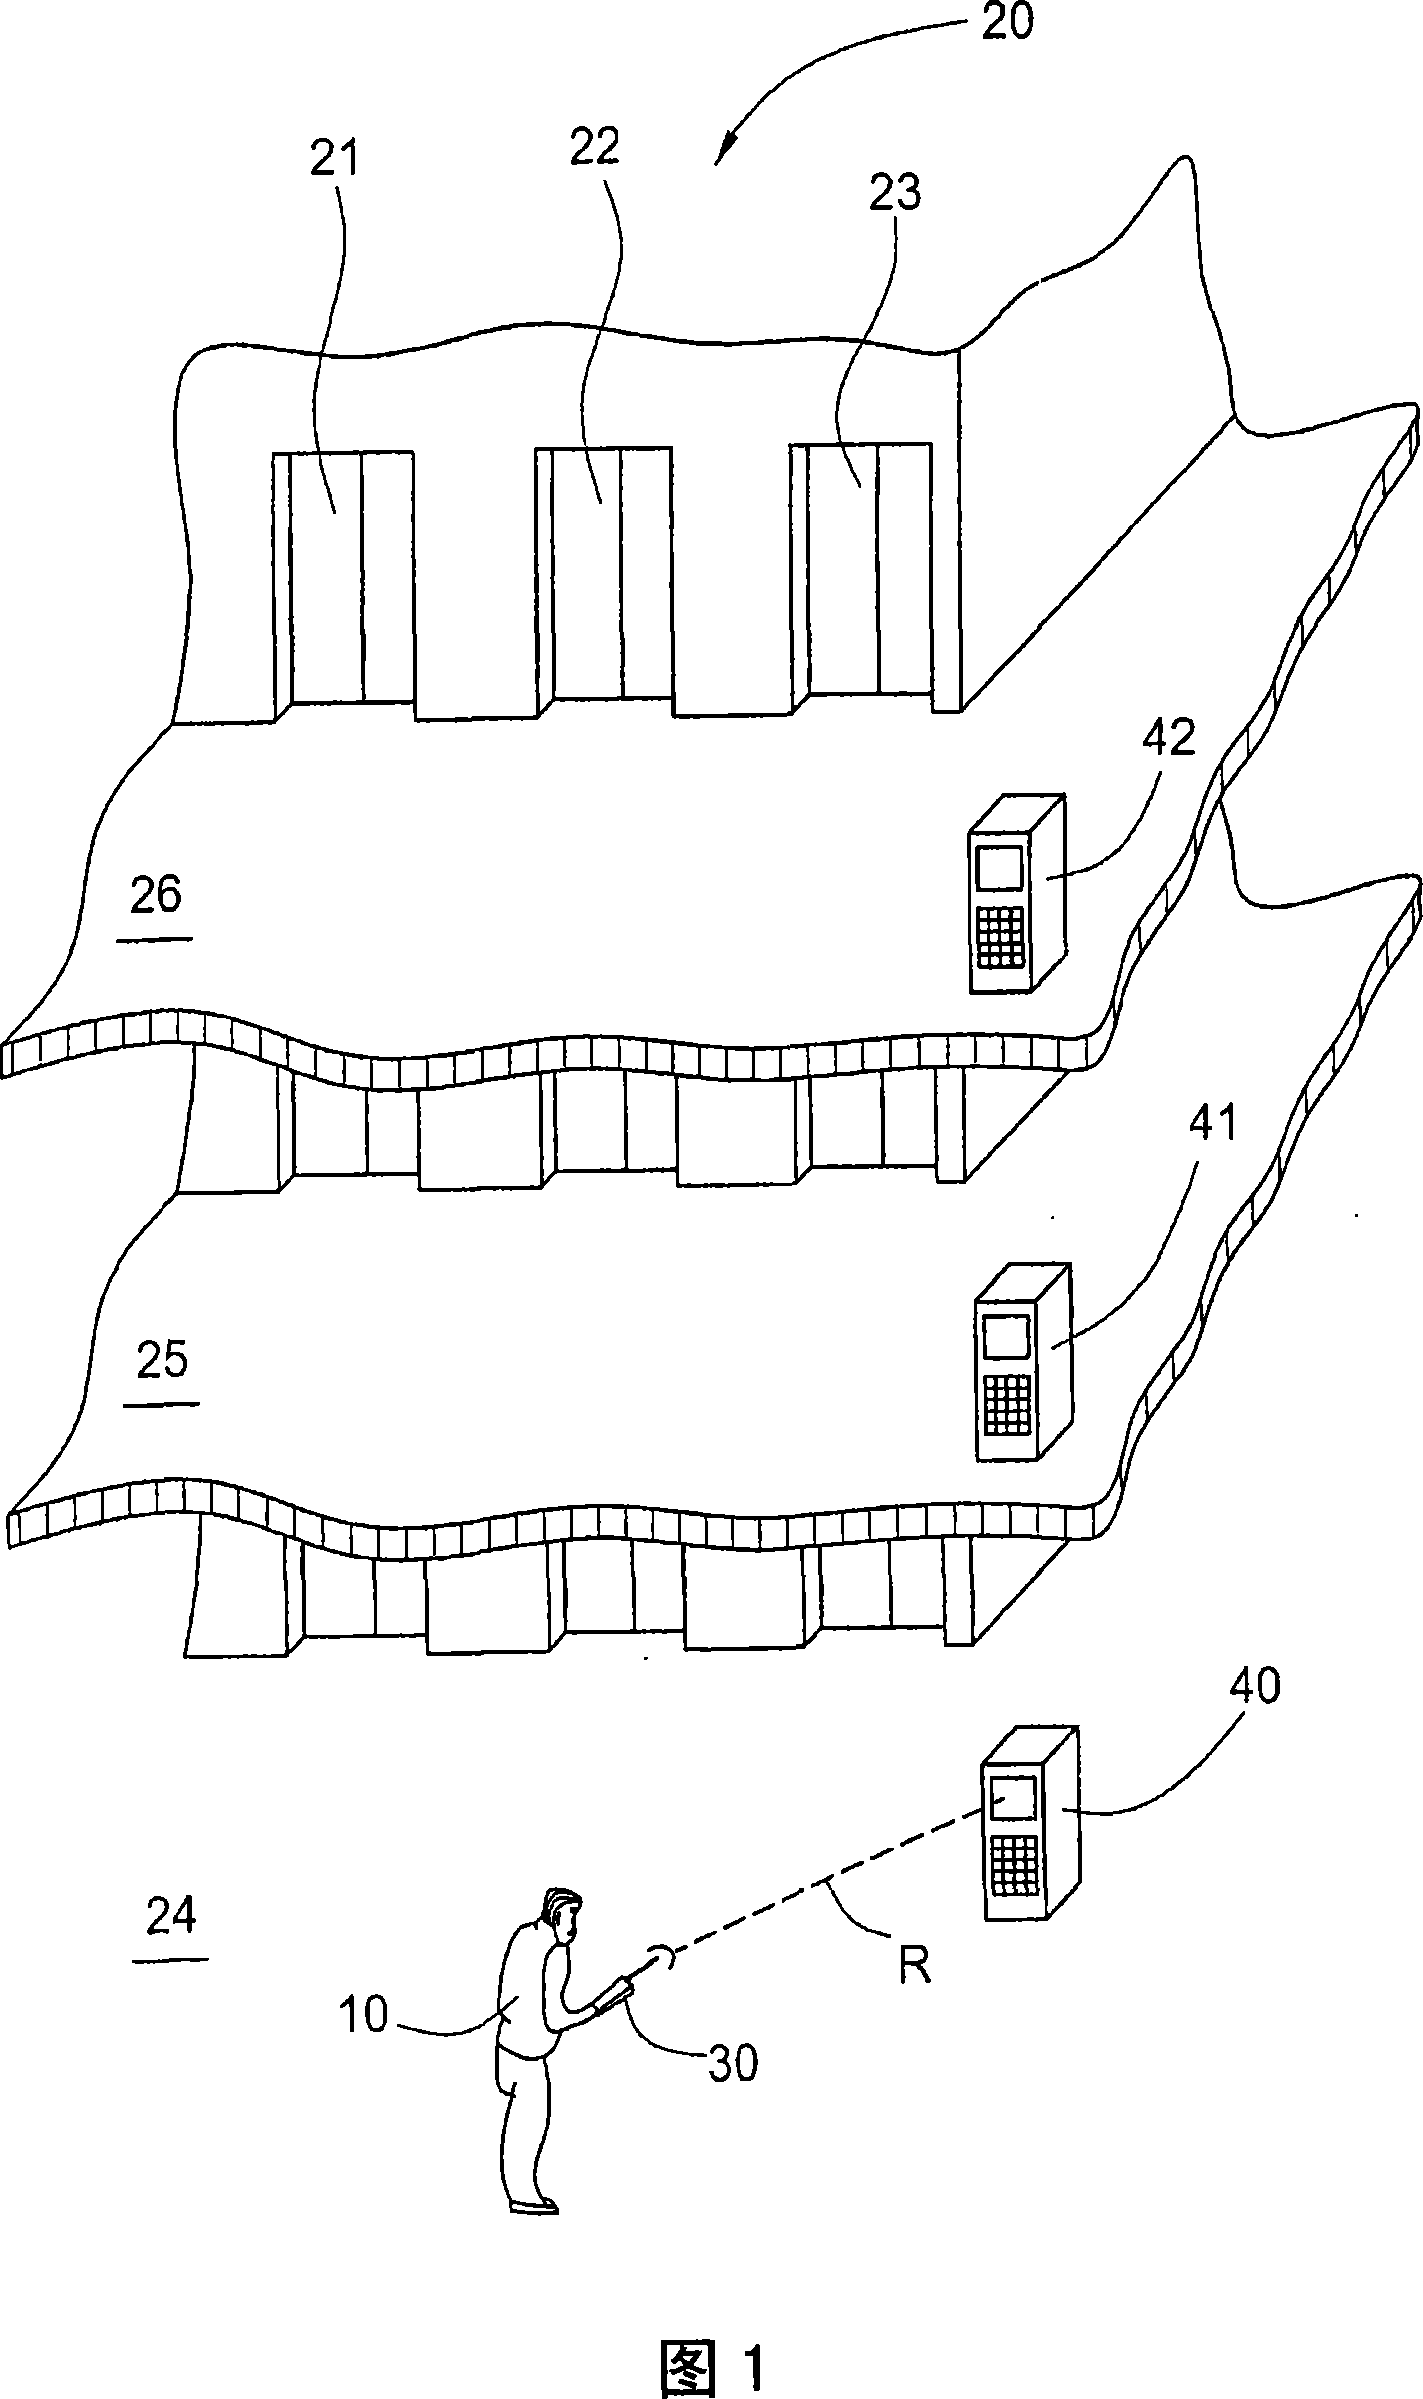 Method for assigning a user to an elevator system